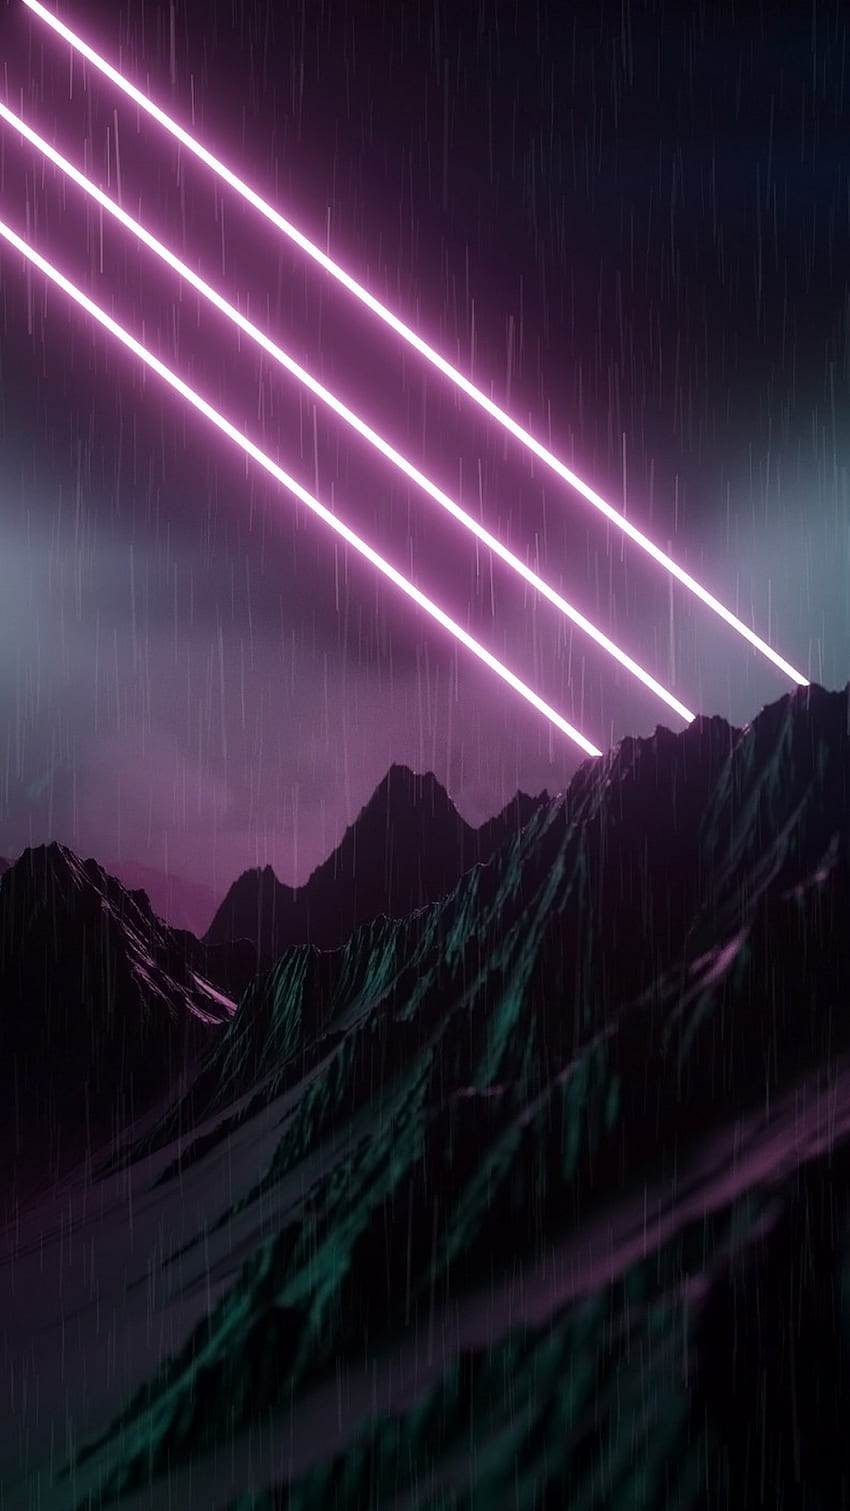 Aesthesic Vaporwave For iPhone Or Android - Vaporwave Mobile Android - & Background, Vaporwave X HD phone wallpaper